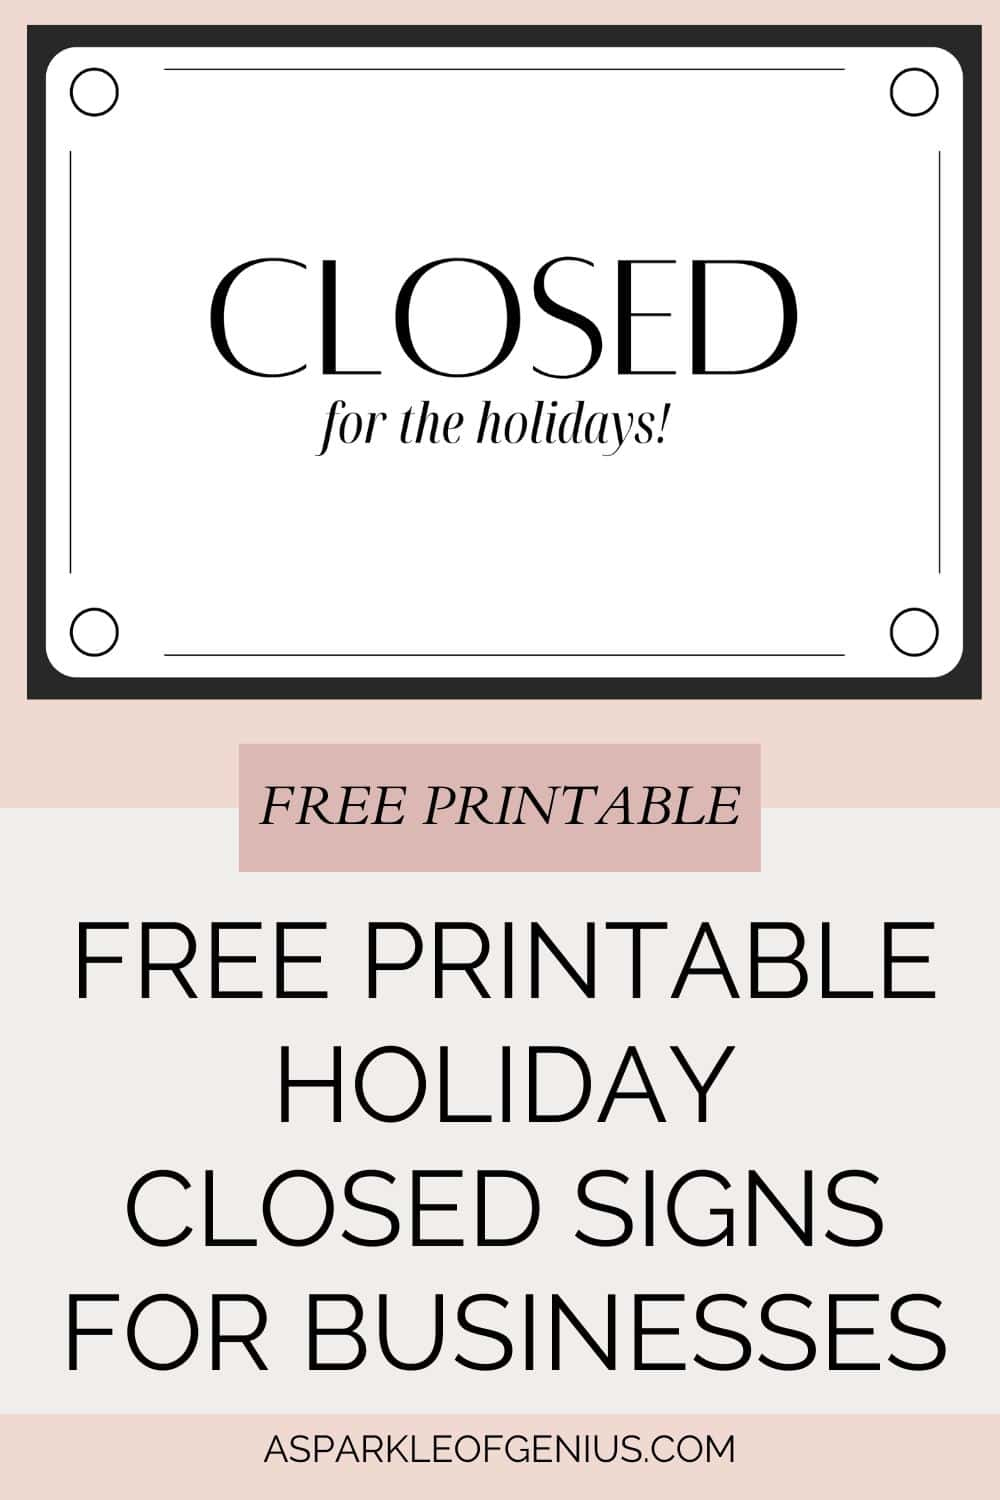 Free Printable Holiday Closed Signs For Businesses - A Sparkle Of with Free Printable Holiday Closed Signs